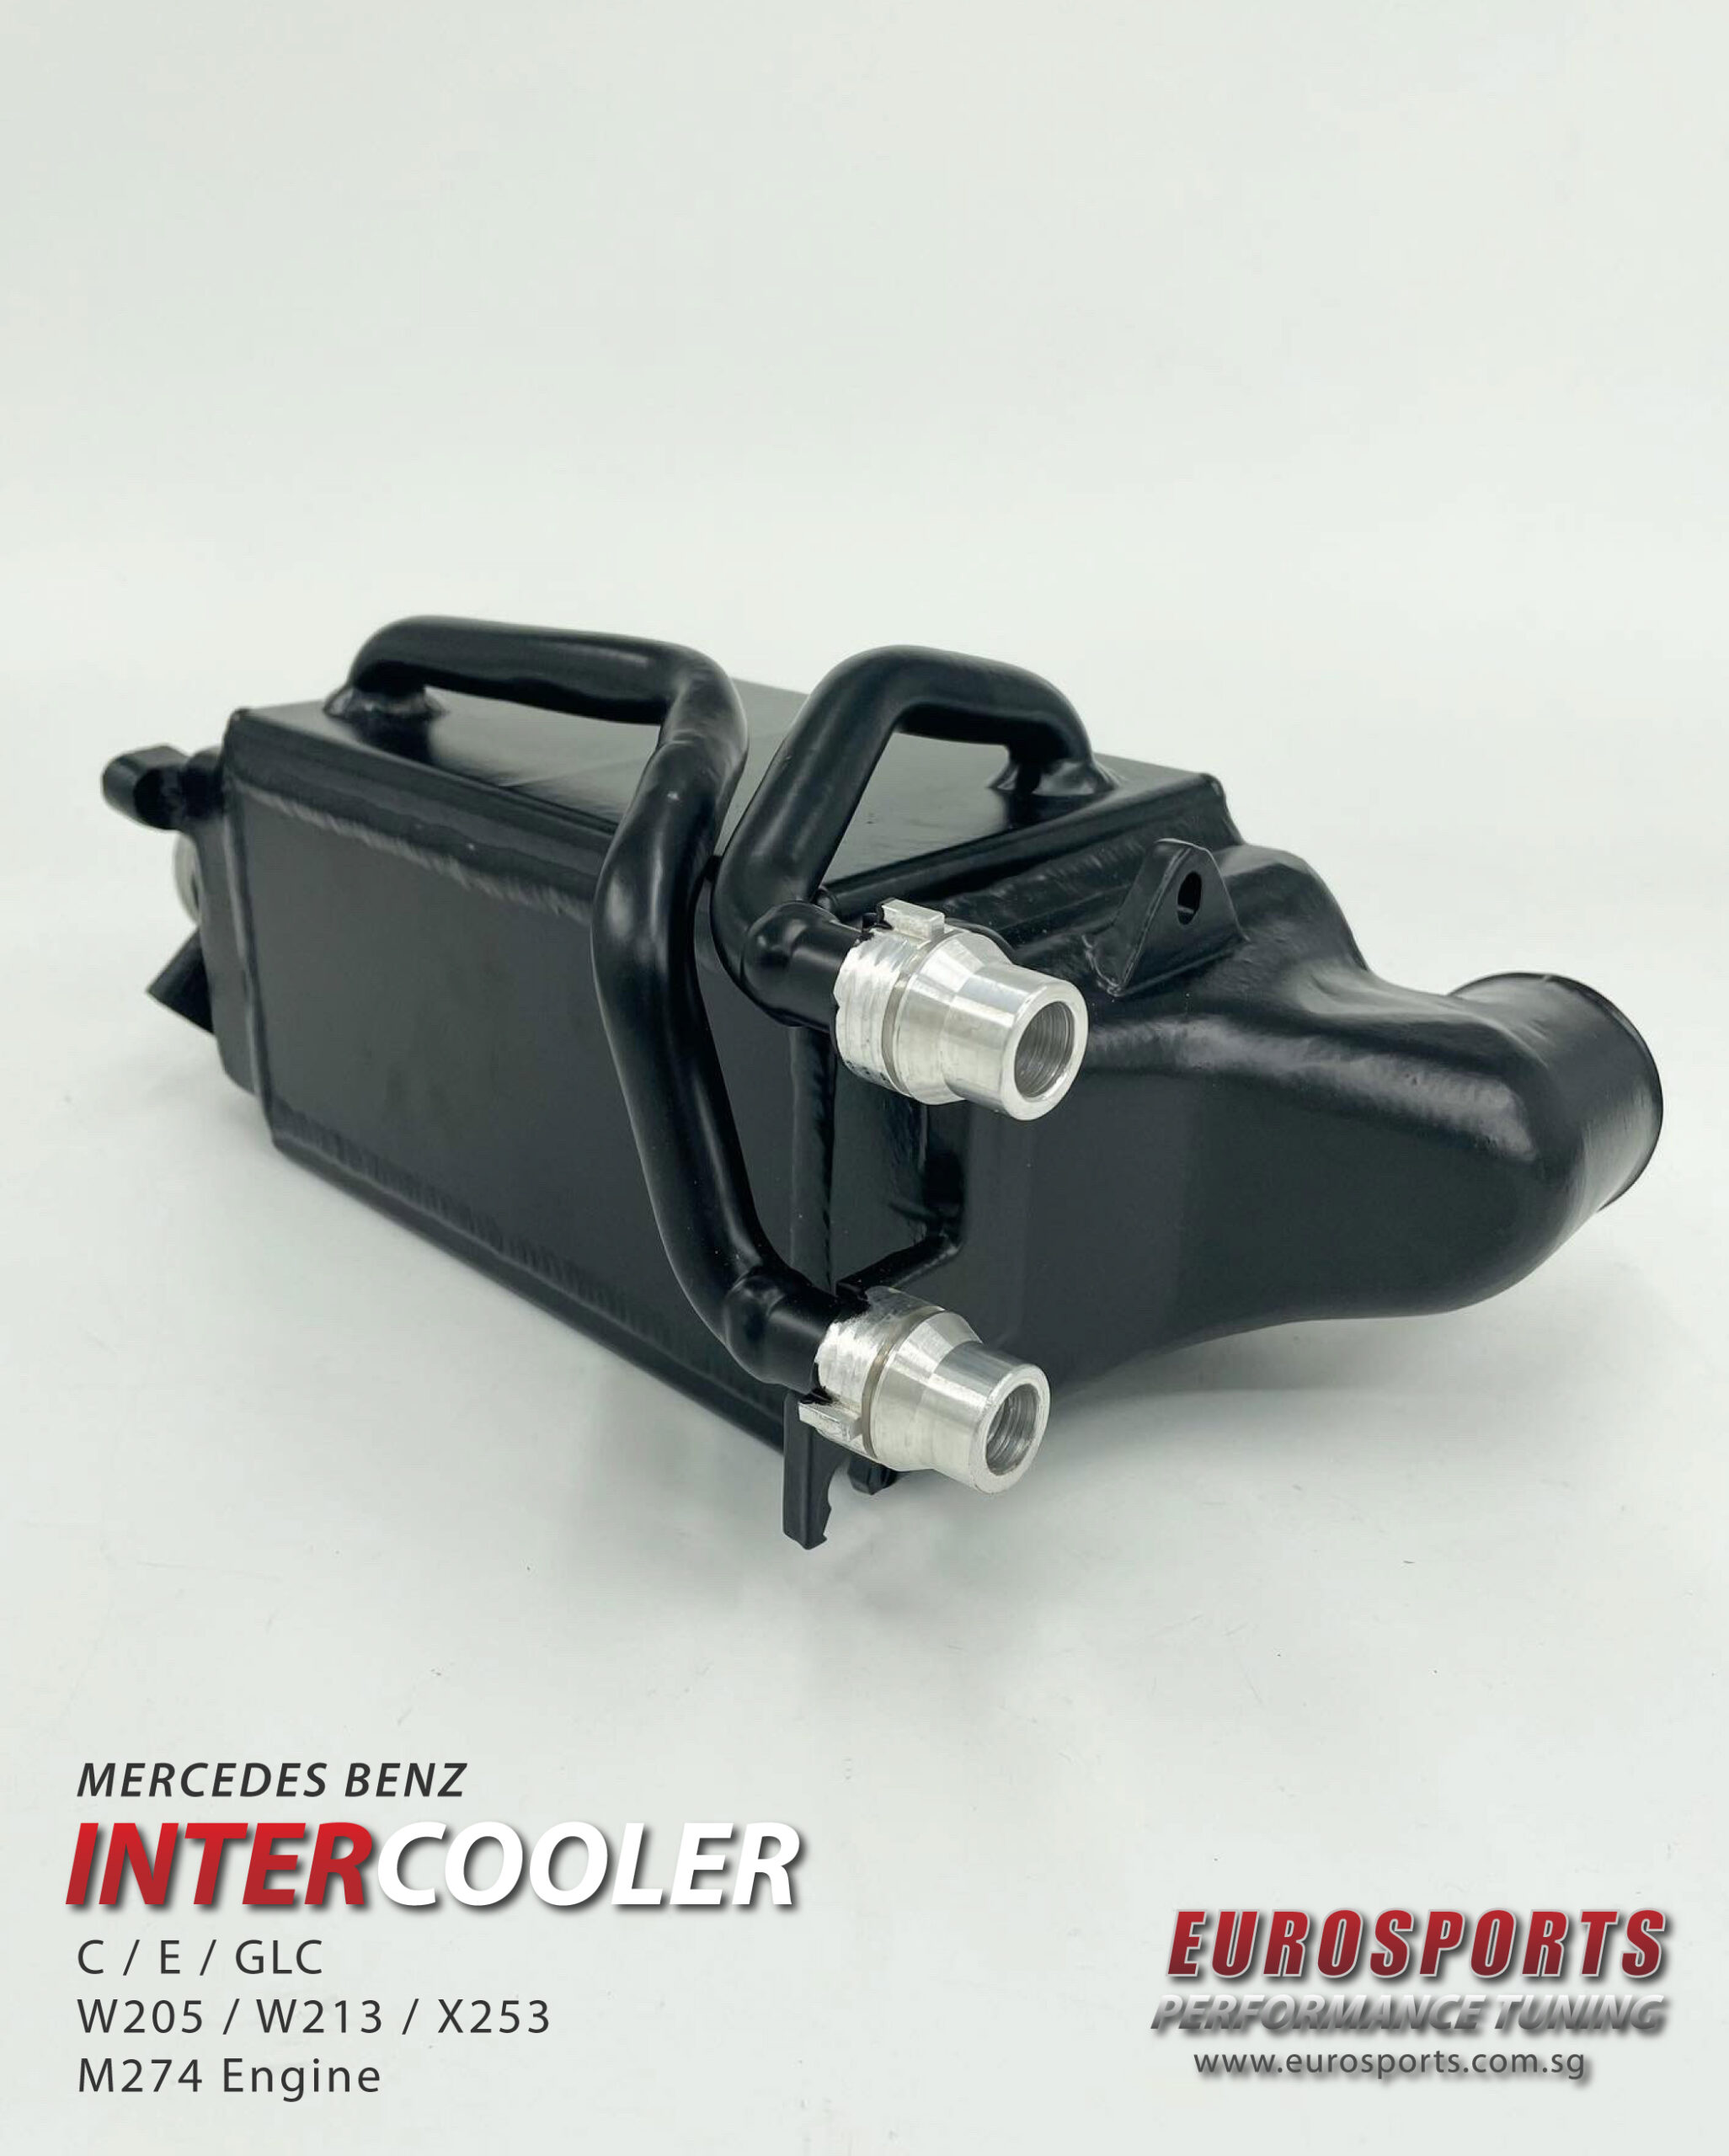 Intercooler Upgrade For Mercedes Benz W205 / W213 / X253 M274 1.6L and 2.0L  Engines